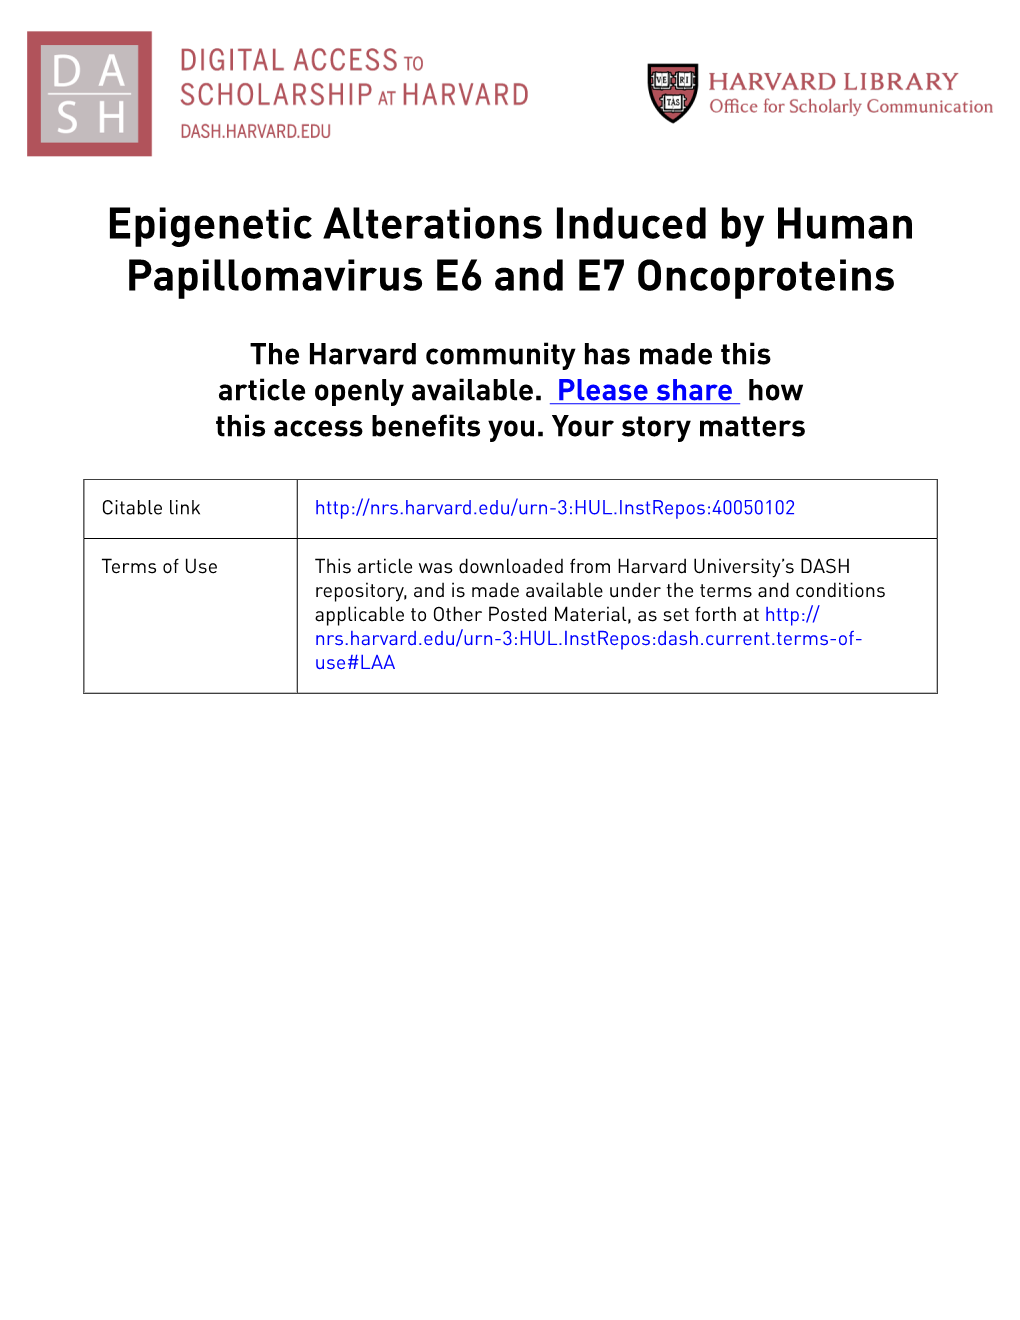 Epigenetic Alterations Induced by Human Papillomavirus E6 and E7 Oncoproteins